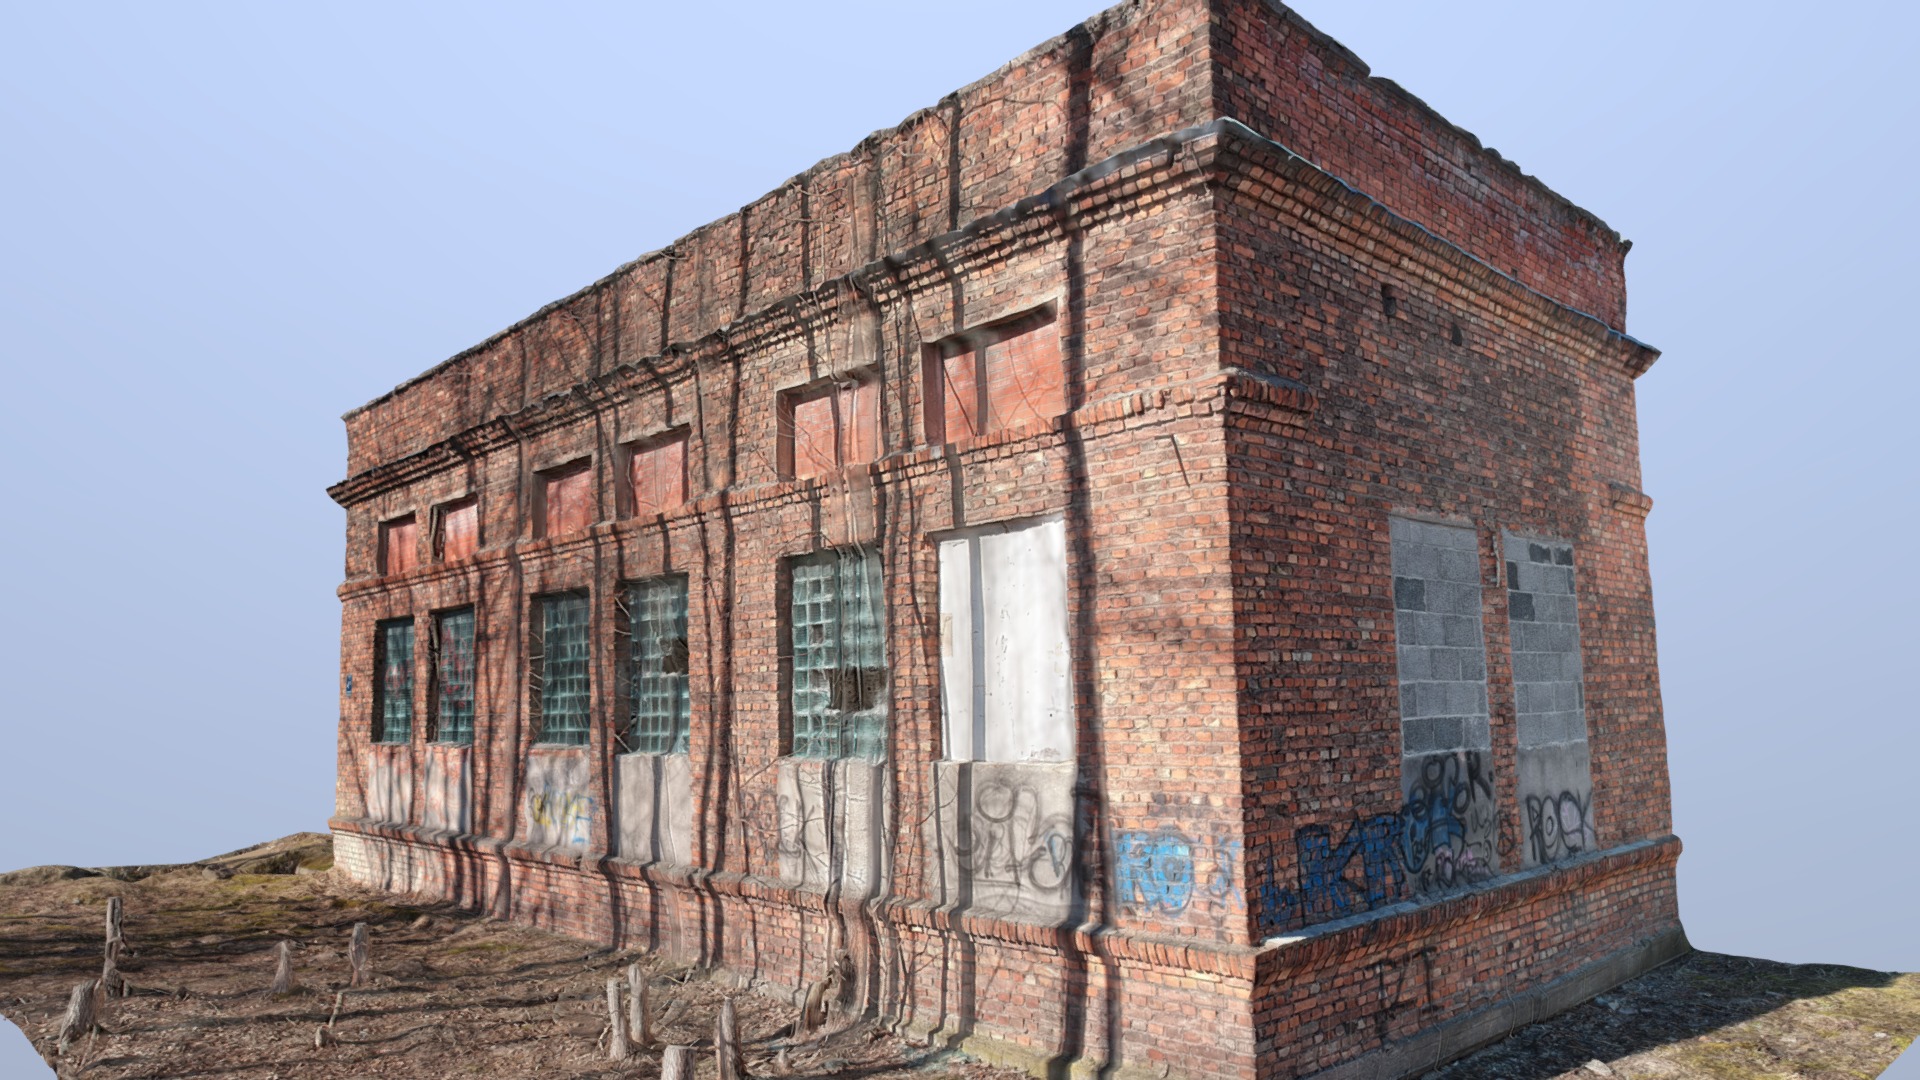 3D model Abandoned Brick Building Scan - This is a 3D model of the Abandoned Brick Building Scan. The 3D model is about a building with graffiti on it.